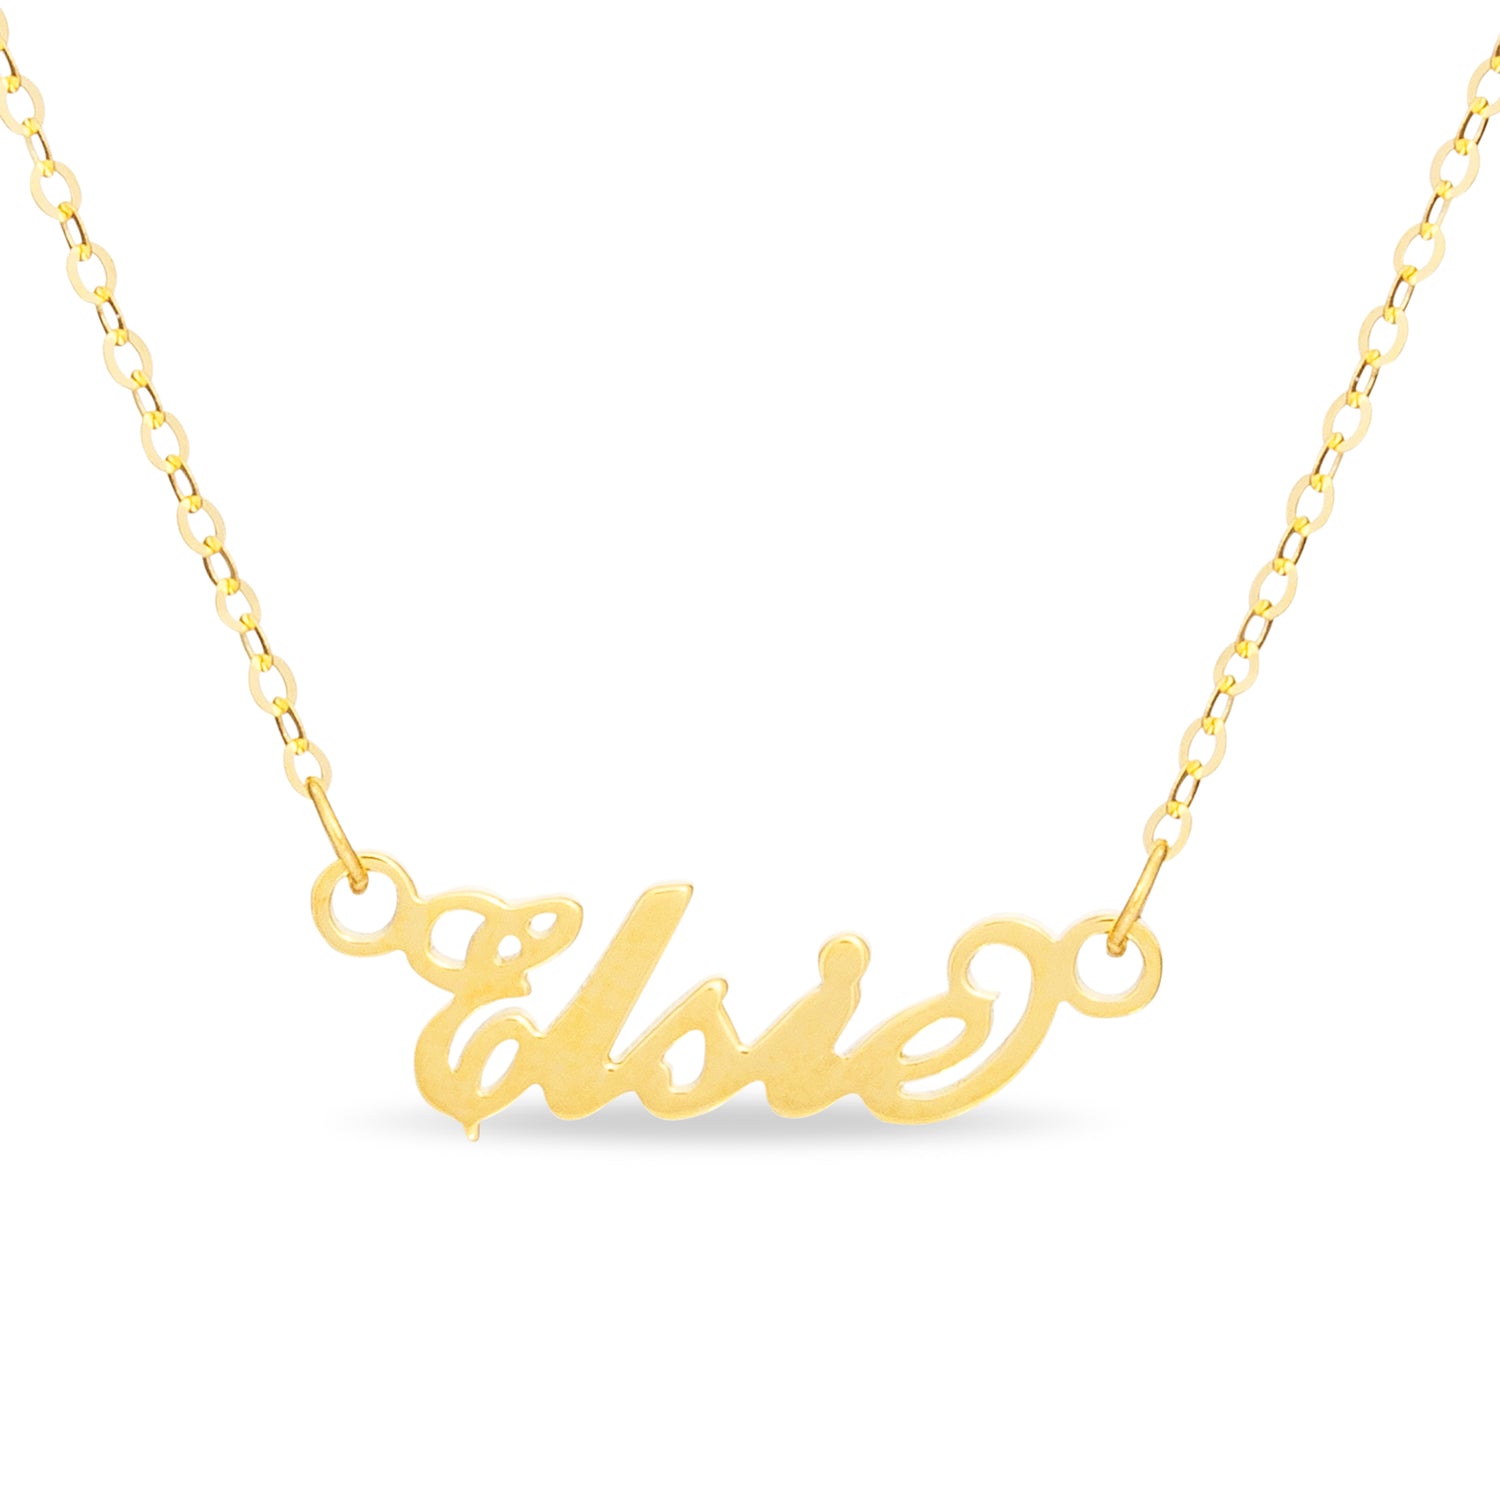 Solid Gold Carrie Style Name Necklace